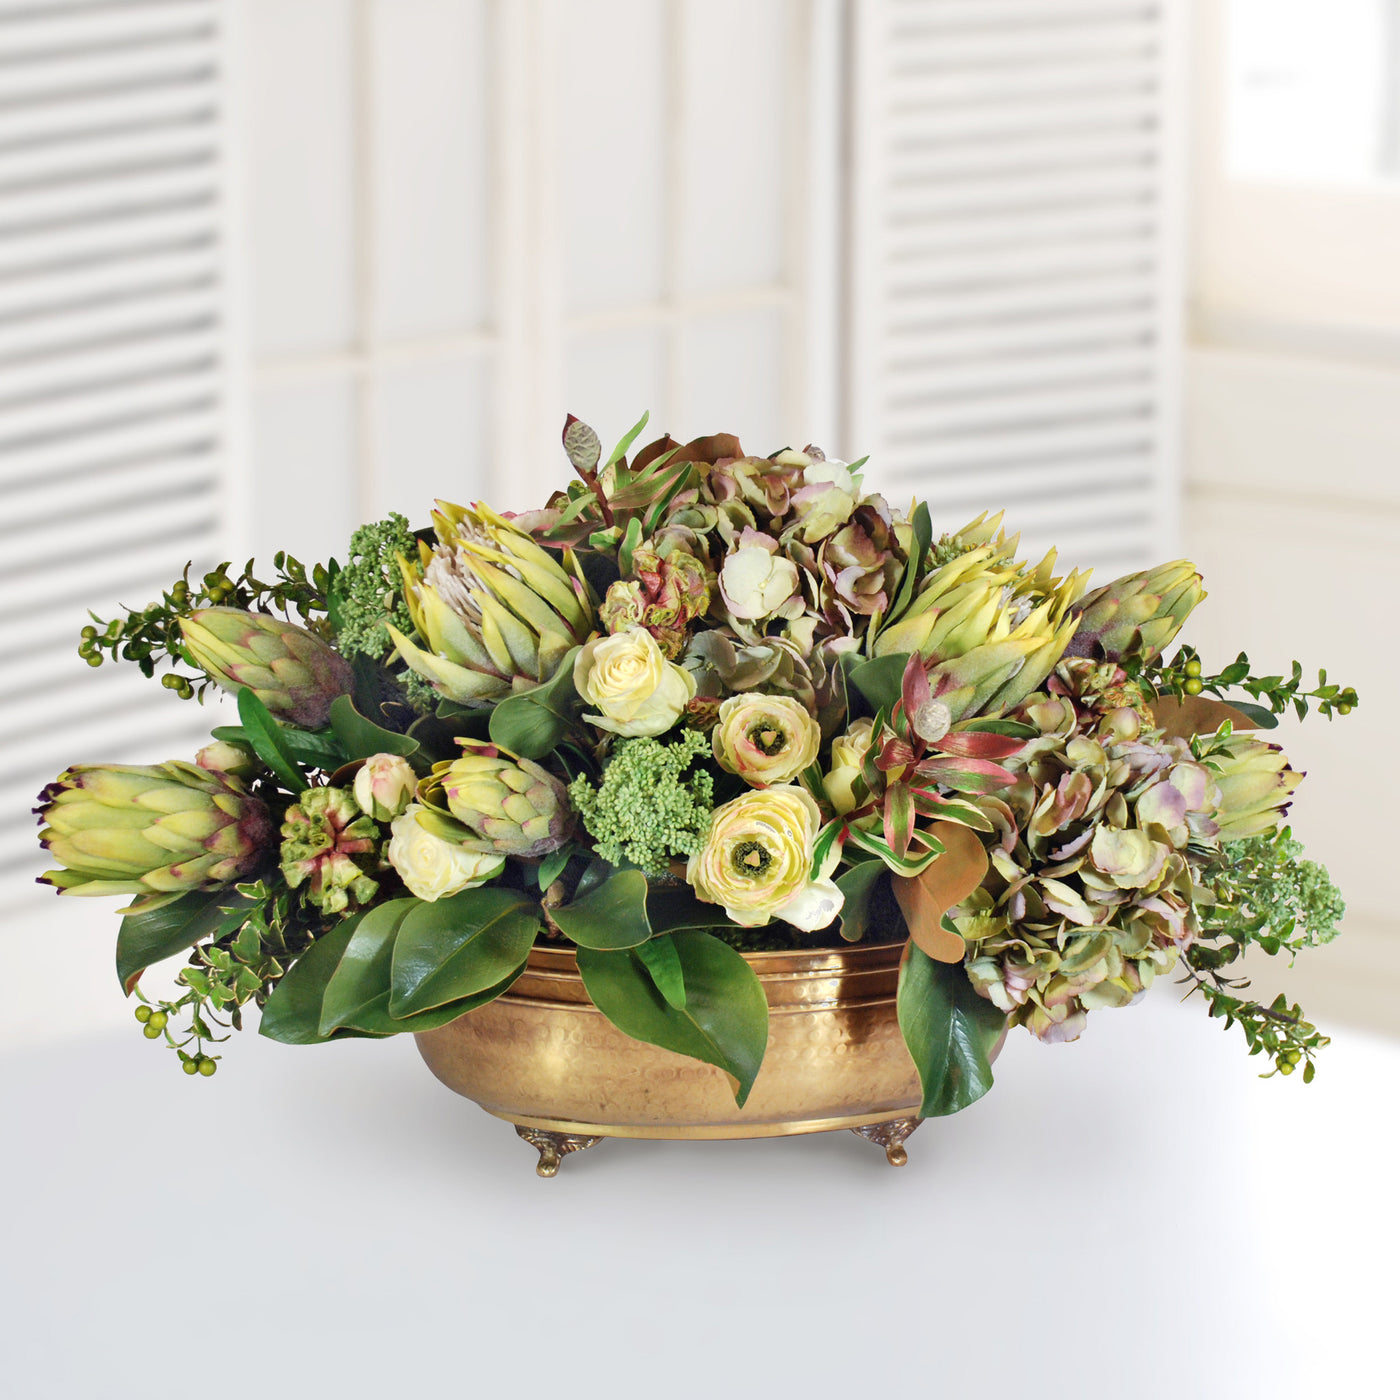 ANGELICA AND RANUNCULUS MIX (WHD065.GR) - Winward Home faux floral arrangements